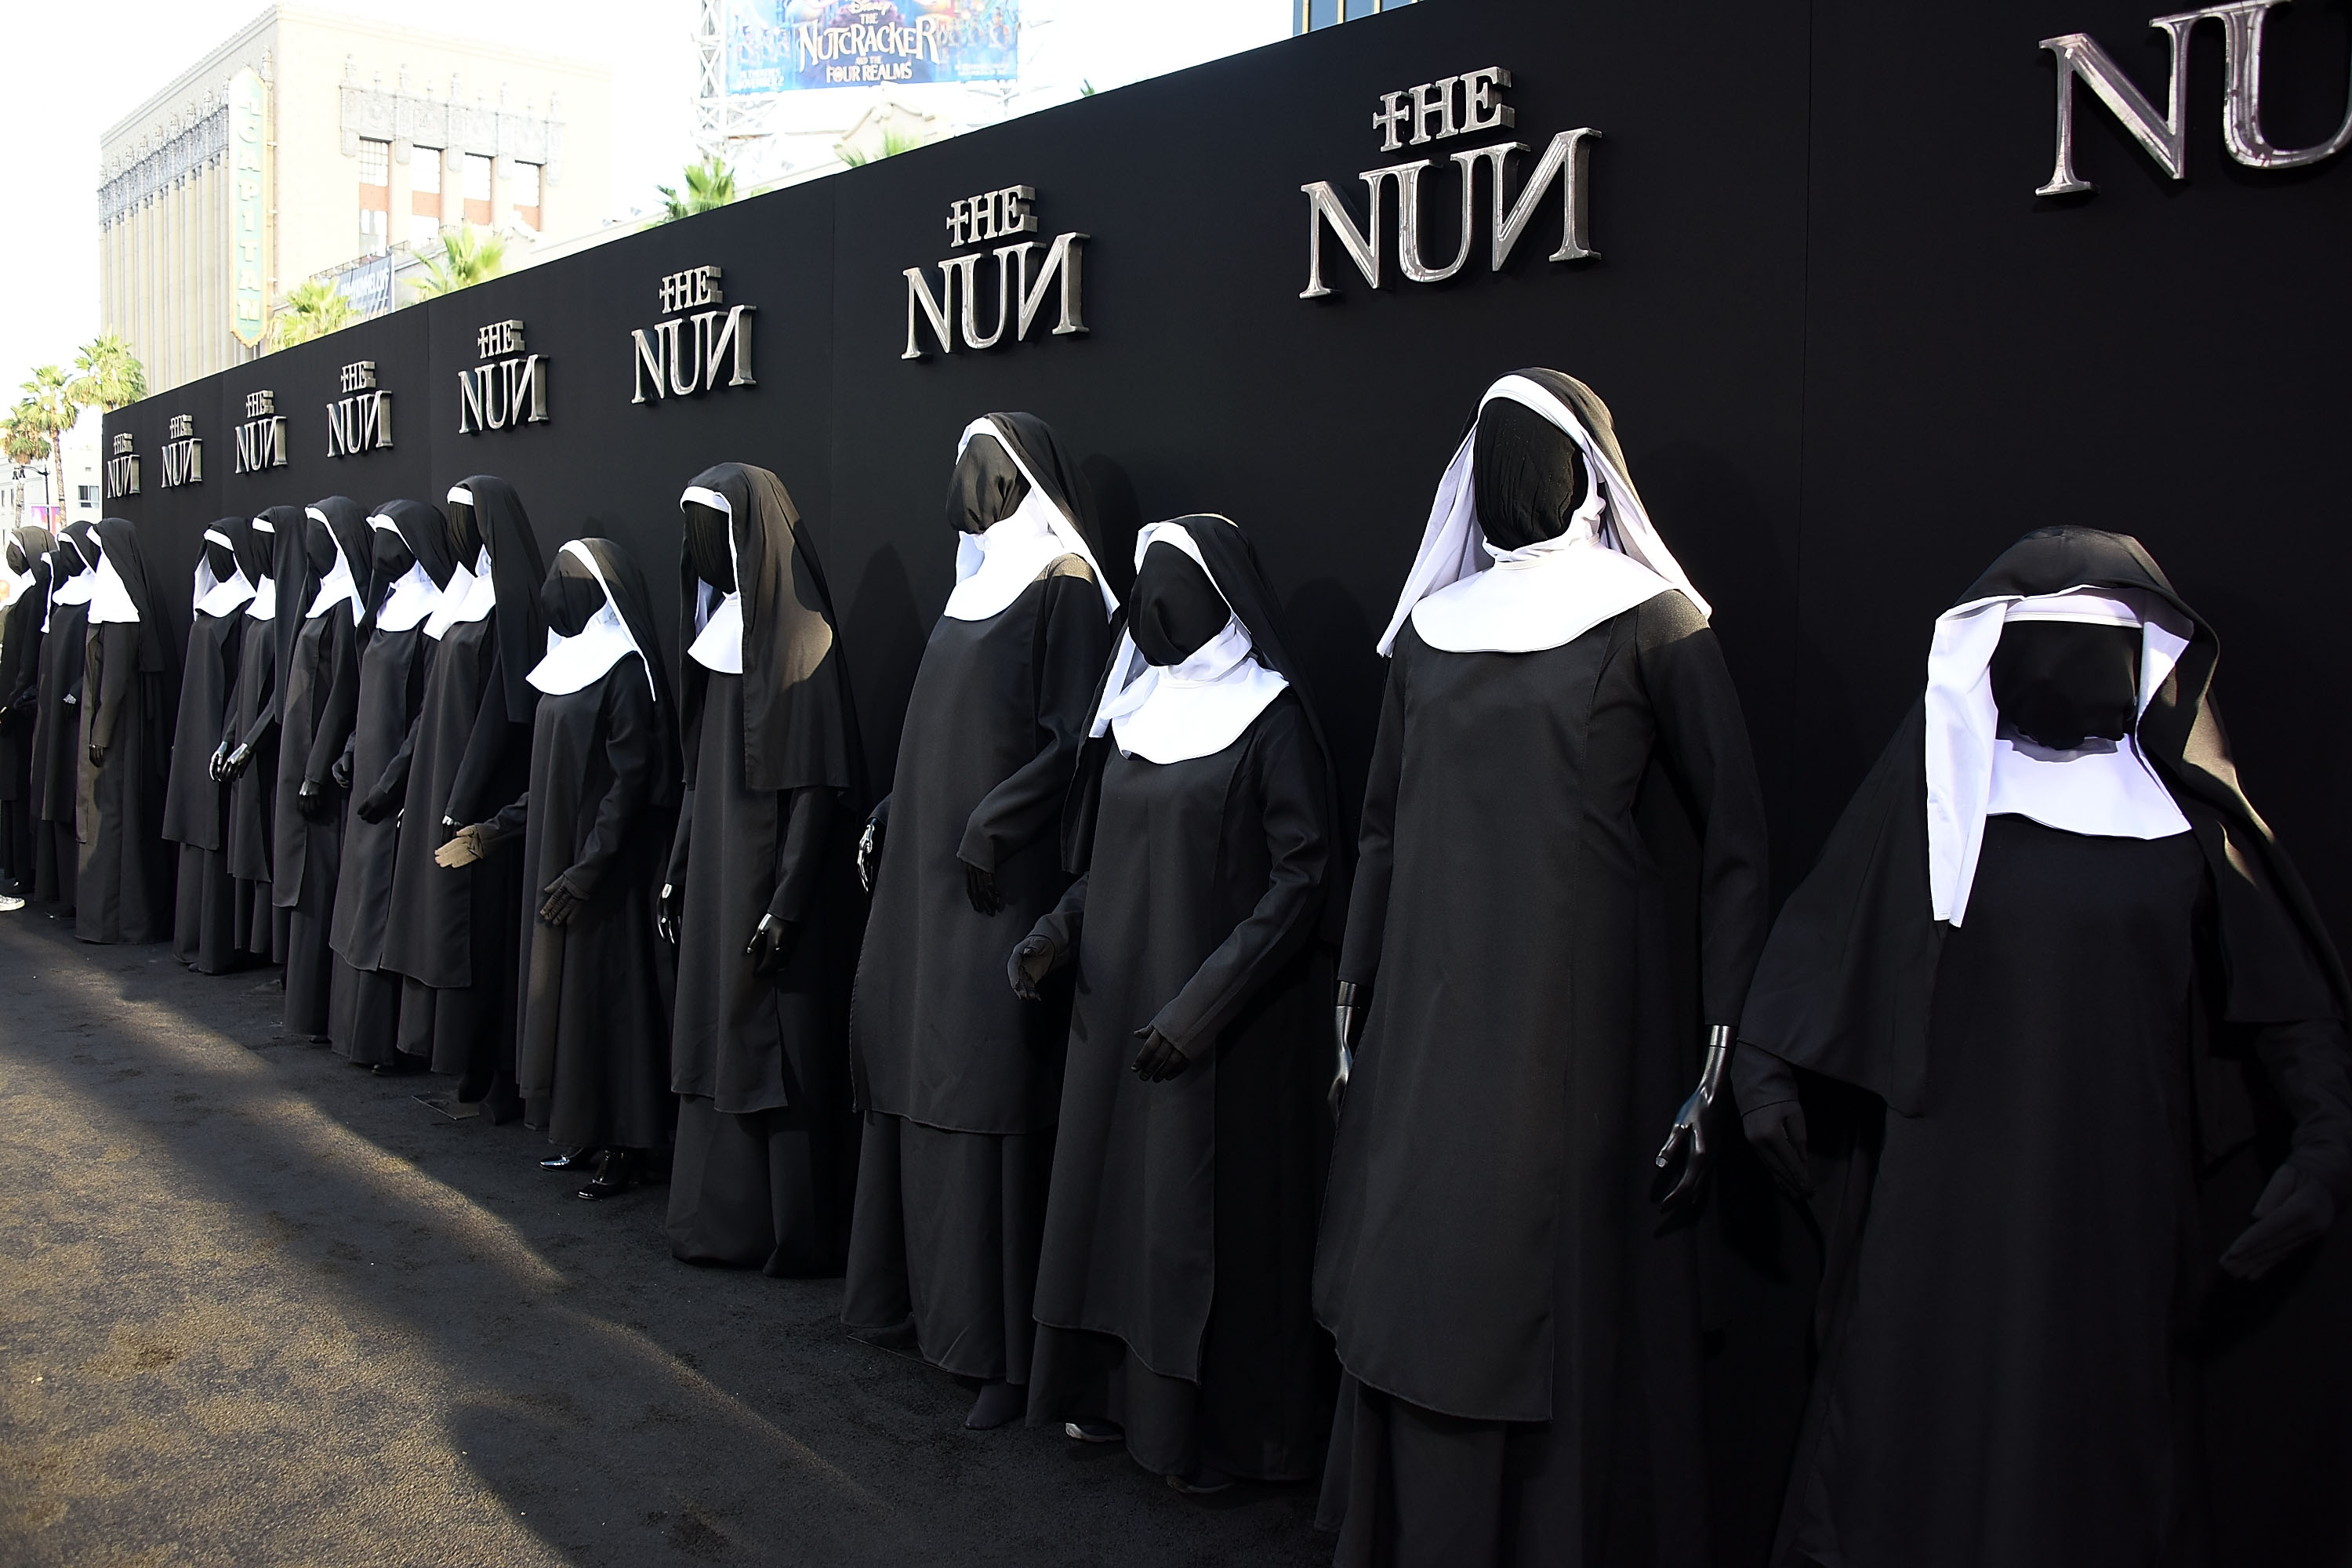 “The Nun” Is The Highest-Grossing Film In “The Conjuring” Universe